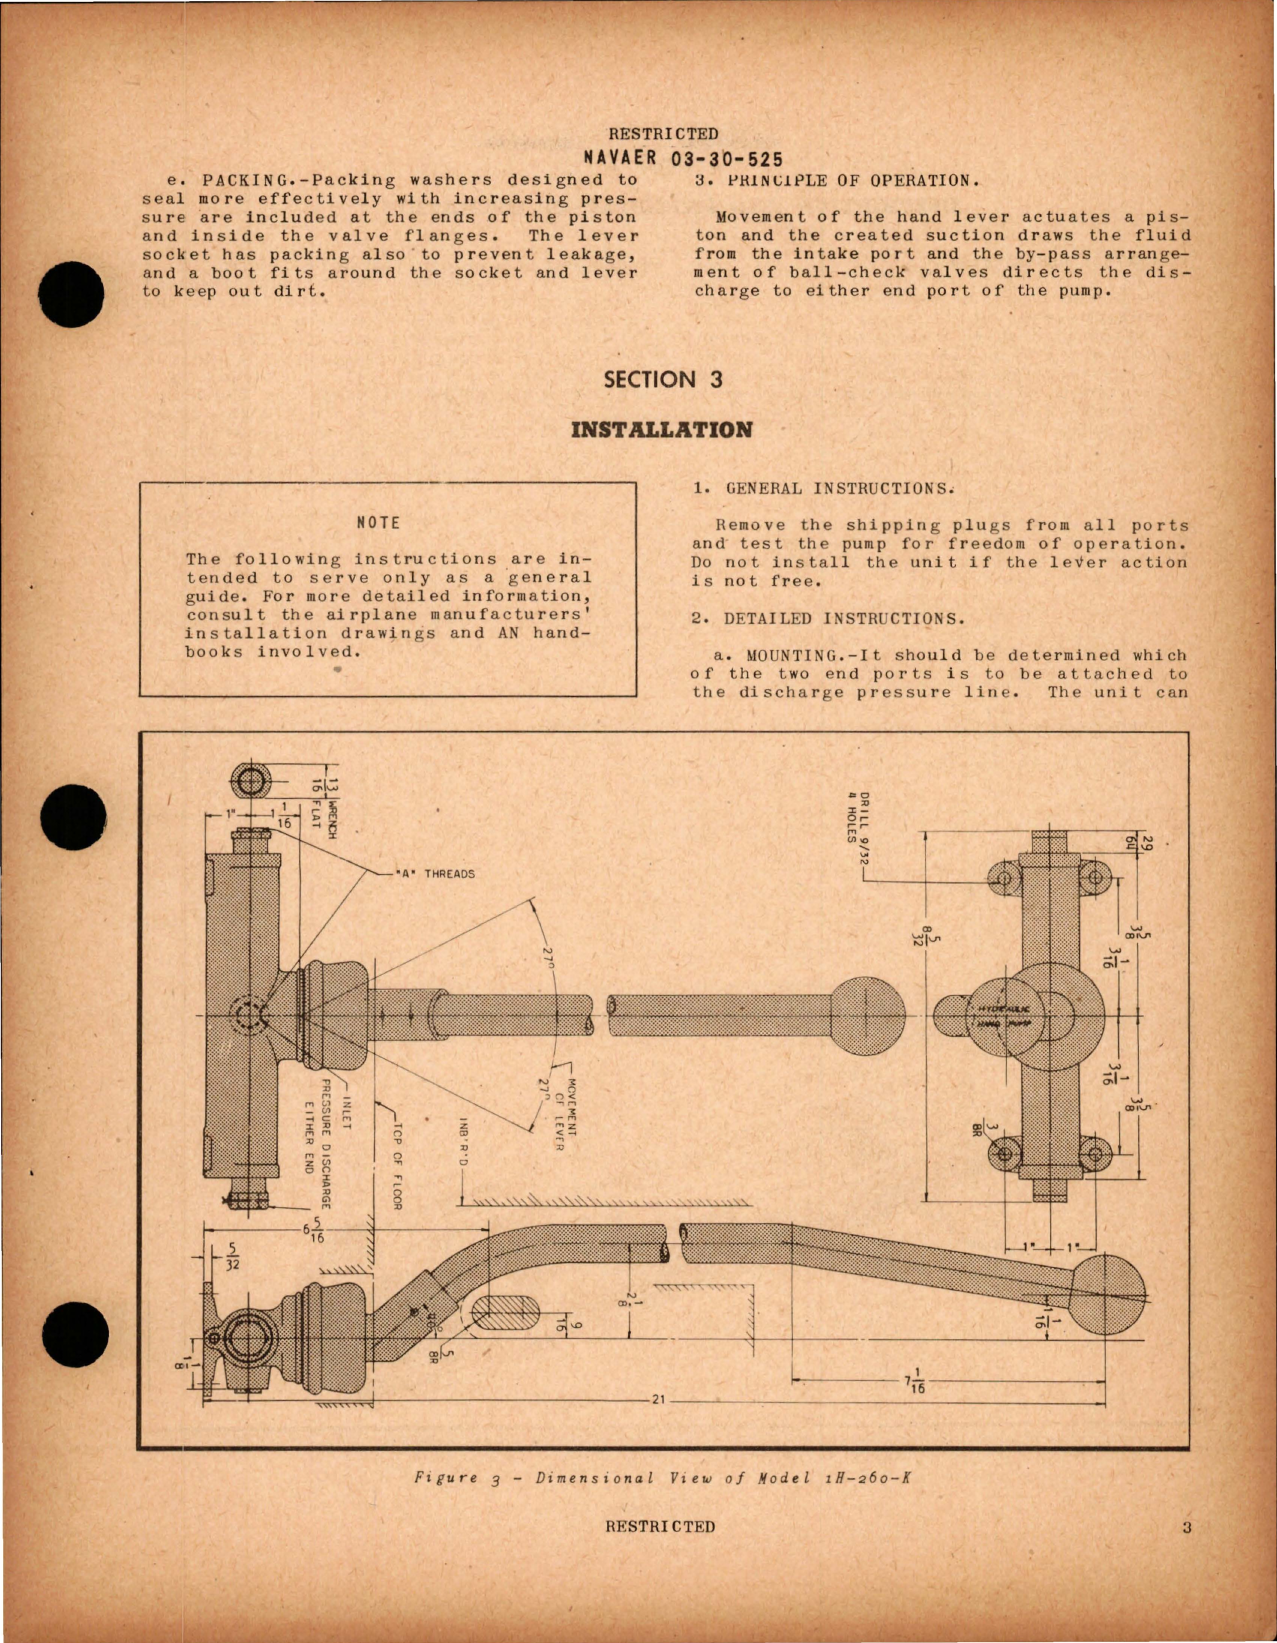 Sample page 7 from AirCorps Library document: Operation, Service & Overhaul Instructions with Parts Catalog for Hydraulic Hand Pump - 1H-260-K, 1H437-F, and 1H-623-A 